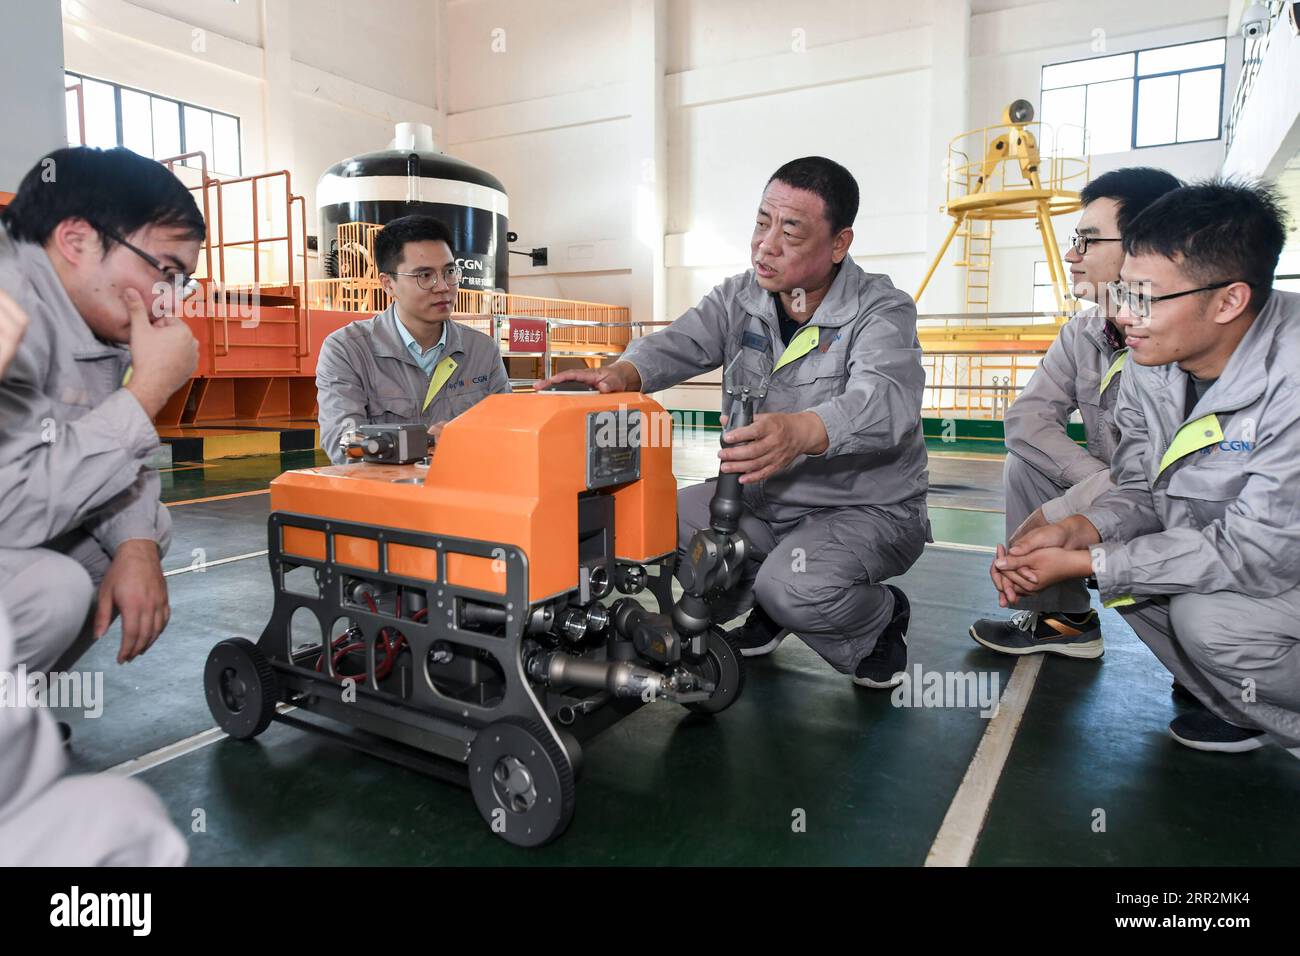 201014 -- SHENZHEN, Oct. 14, 2020 -- Qiao Sukai C discusses with his team members on an underwater robot at a training center in Shenzhen, south China s Guangdong Province, Nov. 20, 2019. Every 18 months, the Dayawan Nuclear Power Plant has to undergo a fuel assemblies replacement, which is one of the most important moments for the nuclear power plant. Dozens of engineers are divided into four shifts and operate the equipment day and night when the reactor is shut down. Their leader, Qiao Sukai, has been dealing with nuclear fuel since July 1993 when the nuclear fuel assembly of Dayawan Nuclea Stock Photo